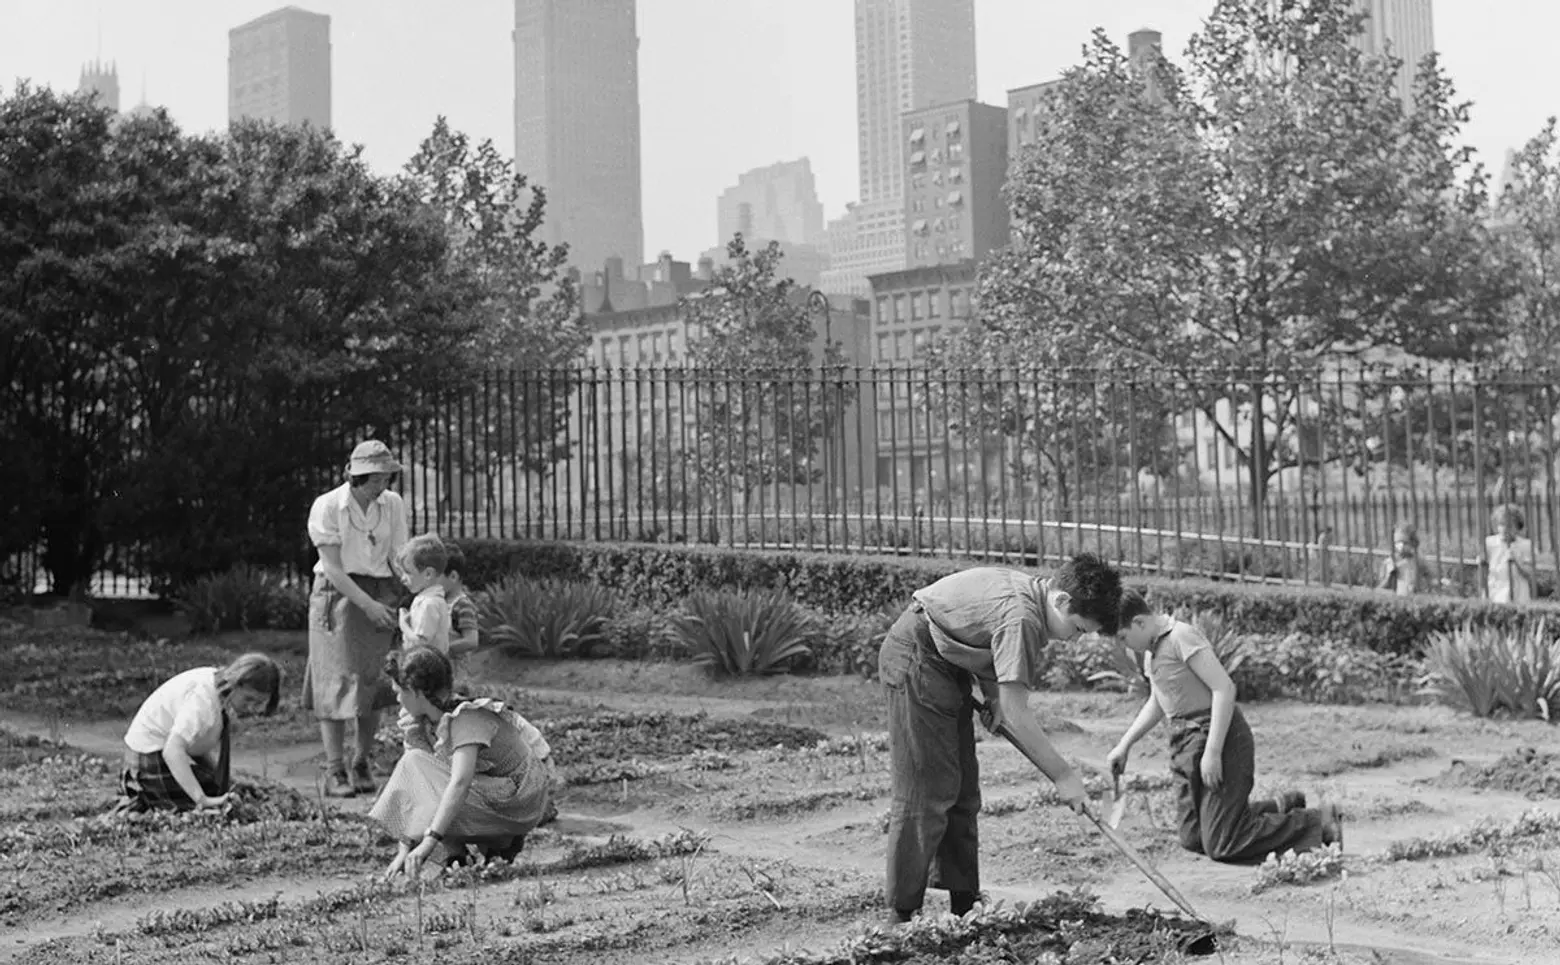 New York’s 1940s ‘victory gardens’ yielded a whopping 200 million pounds of produce